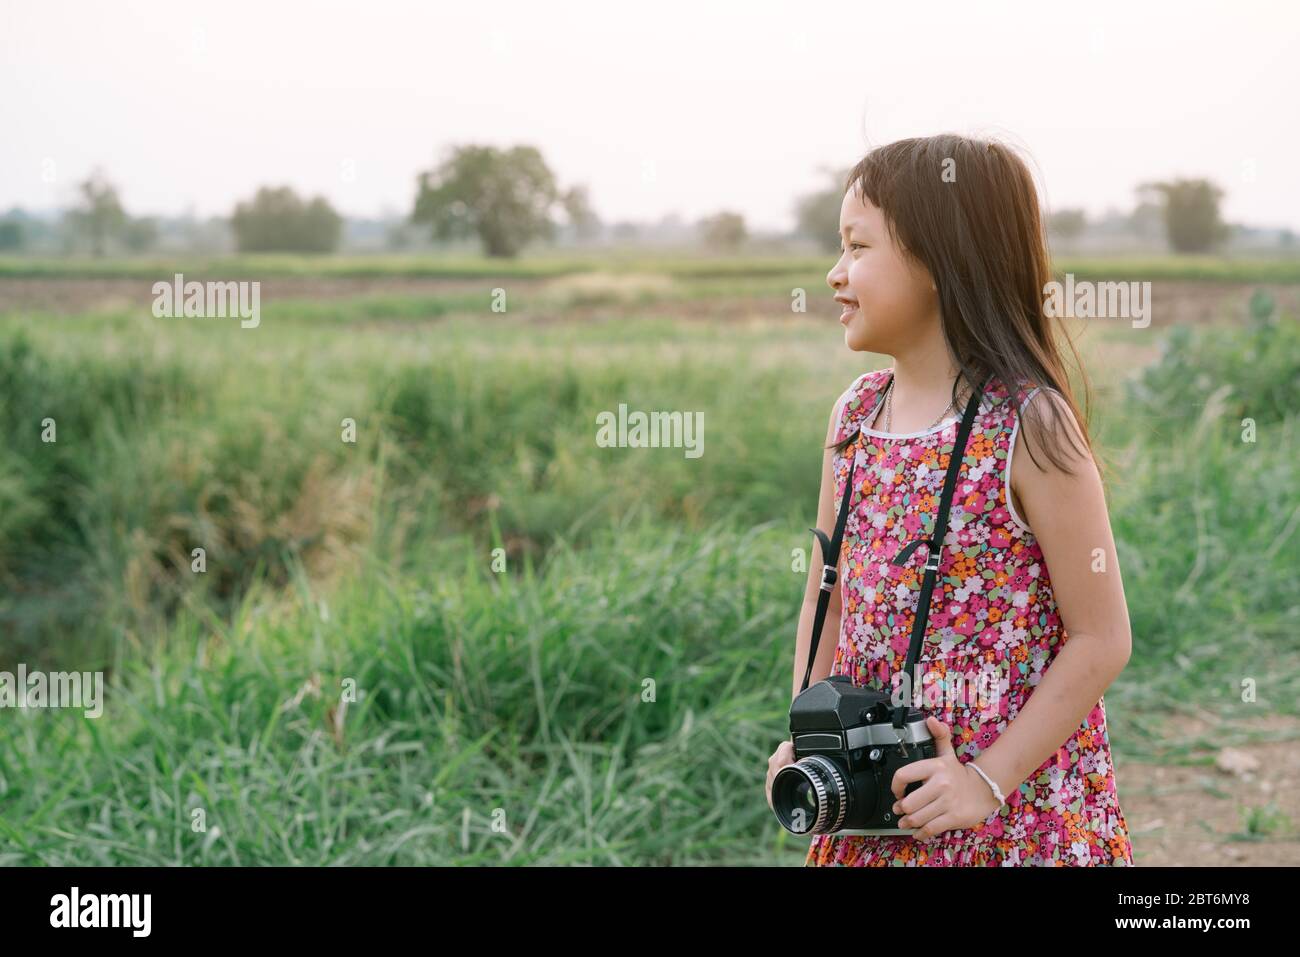 Little child girl holding medium format film camera and taking photo of sunset landscape with green field background Stock Photo